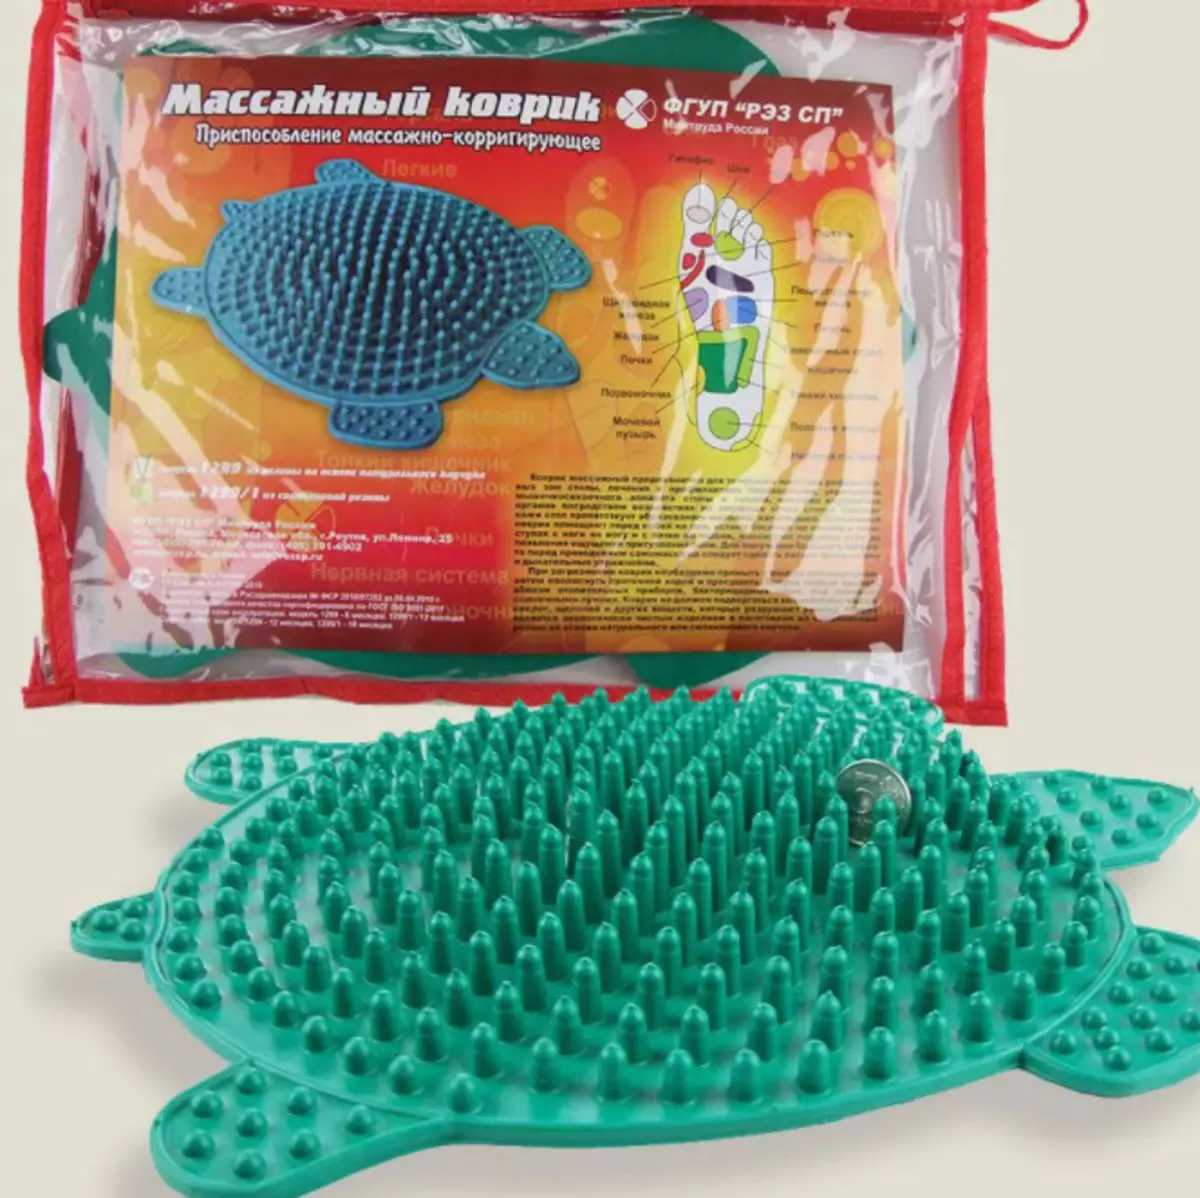 Massage rugs (31 photos): Overview of orthopedic rubber carpet-massager, making with their own hands. How to use them? 16327_25